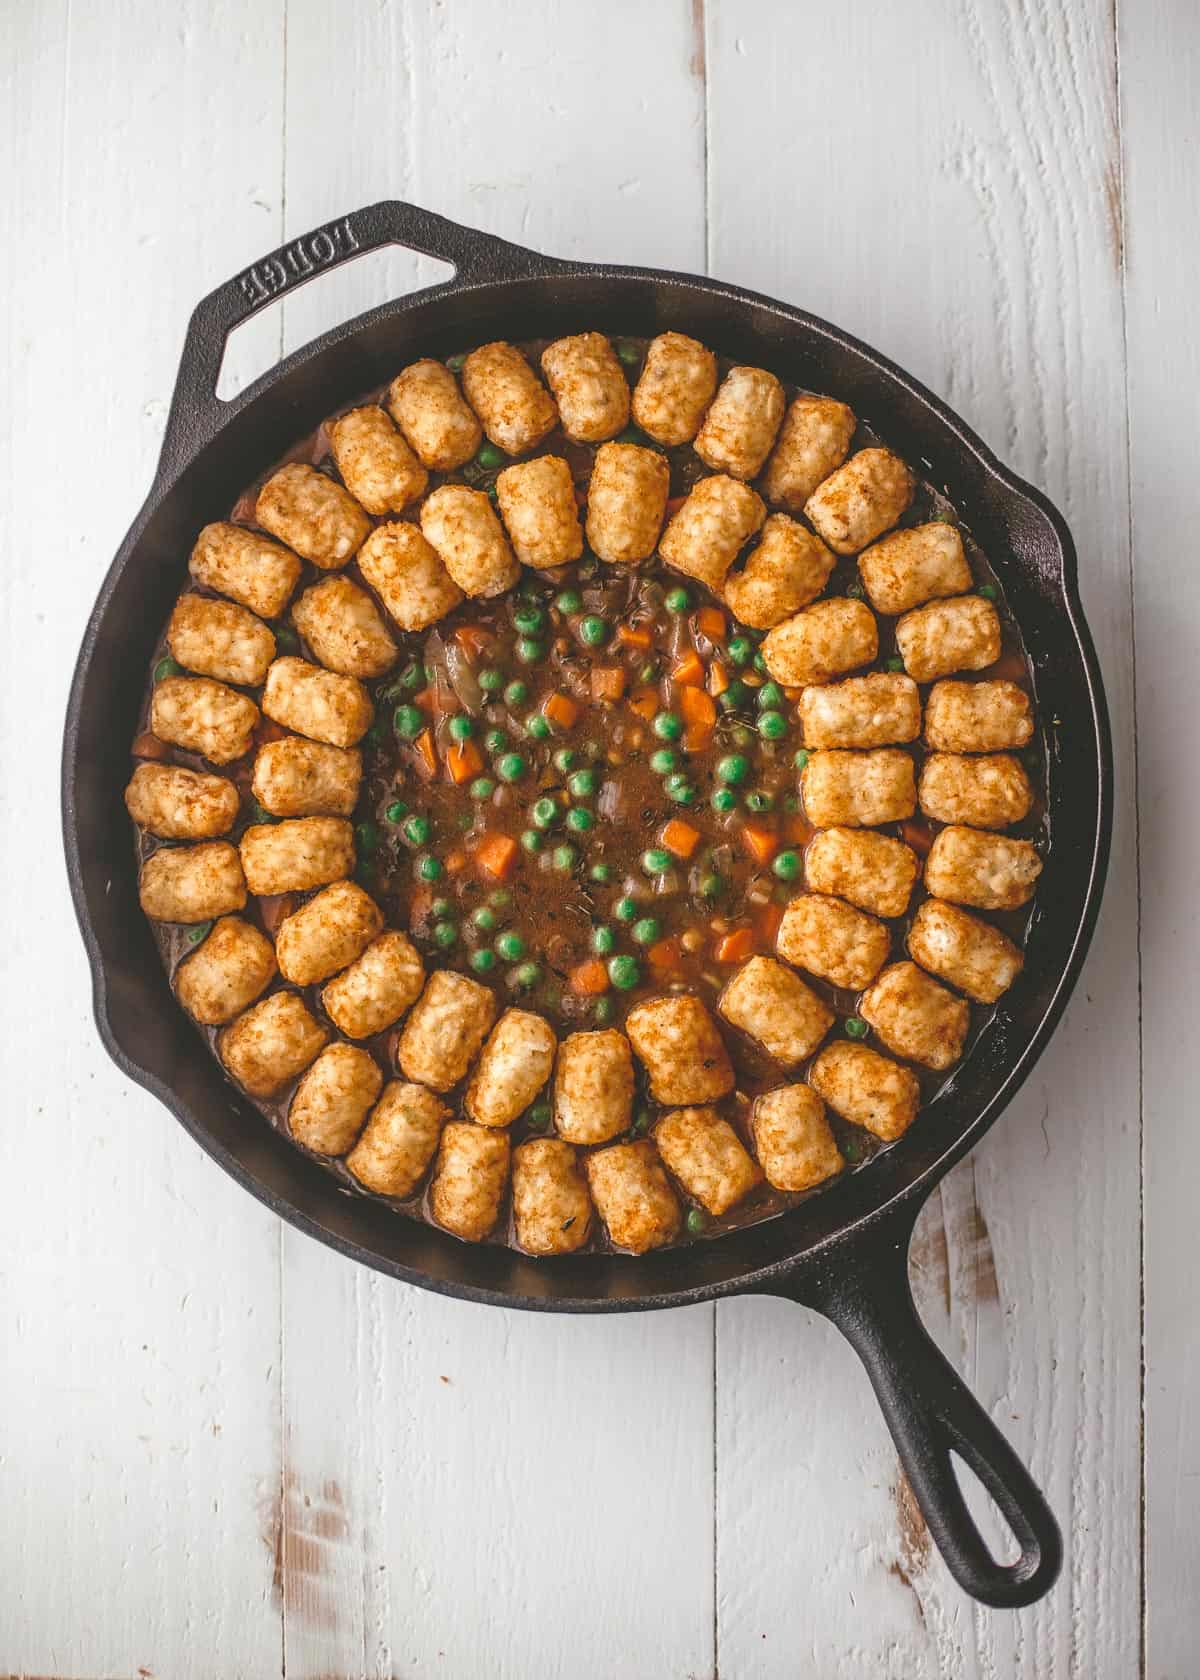 lining a cast iron skillet with tater tots